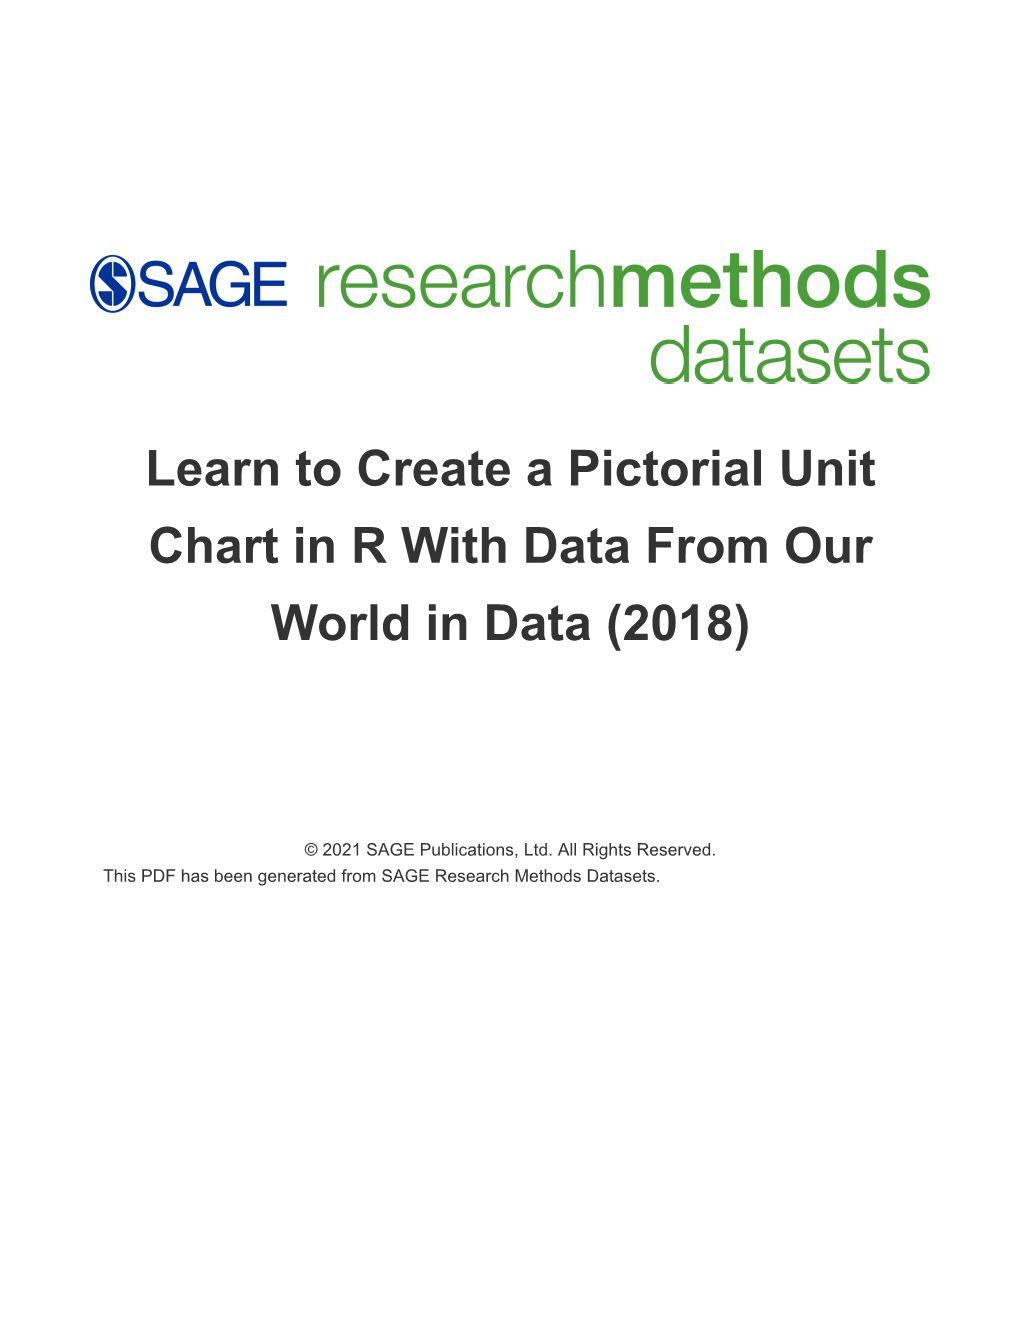 Learn to Create a Pictorial Unit Chart in R with Data from Our World in Data (2018)